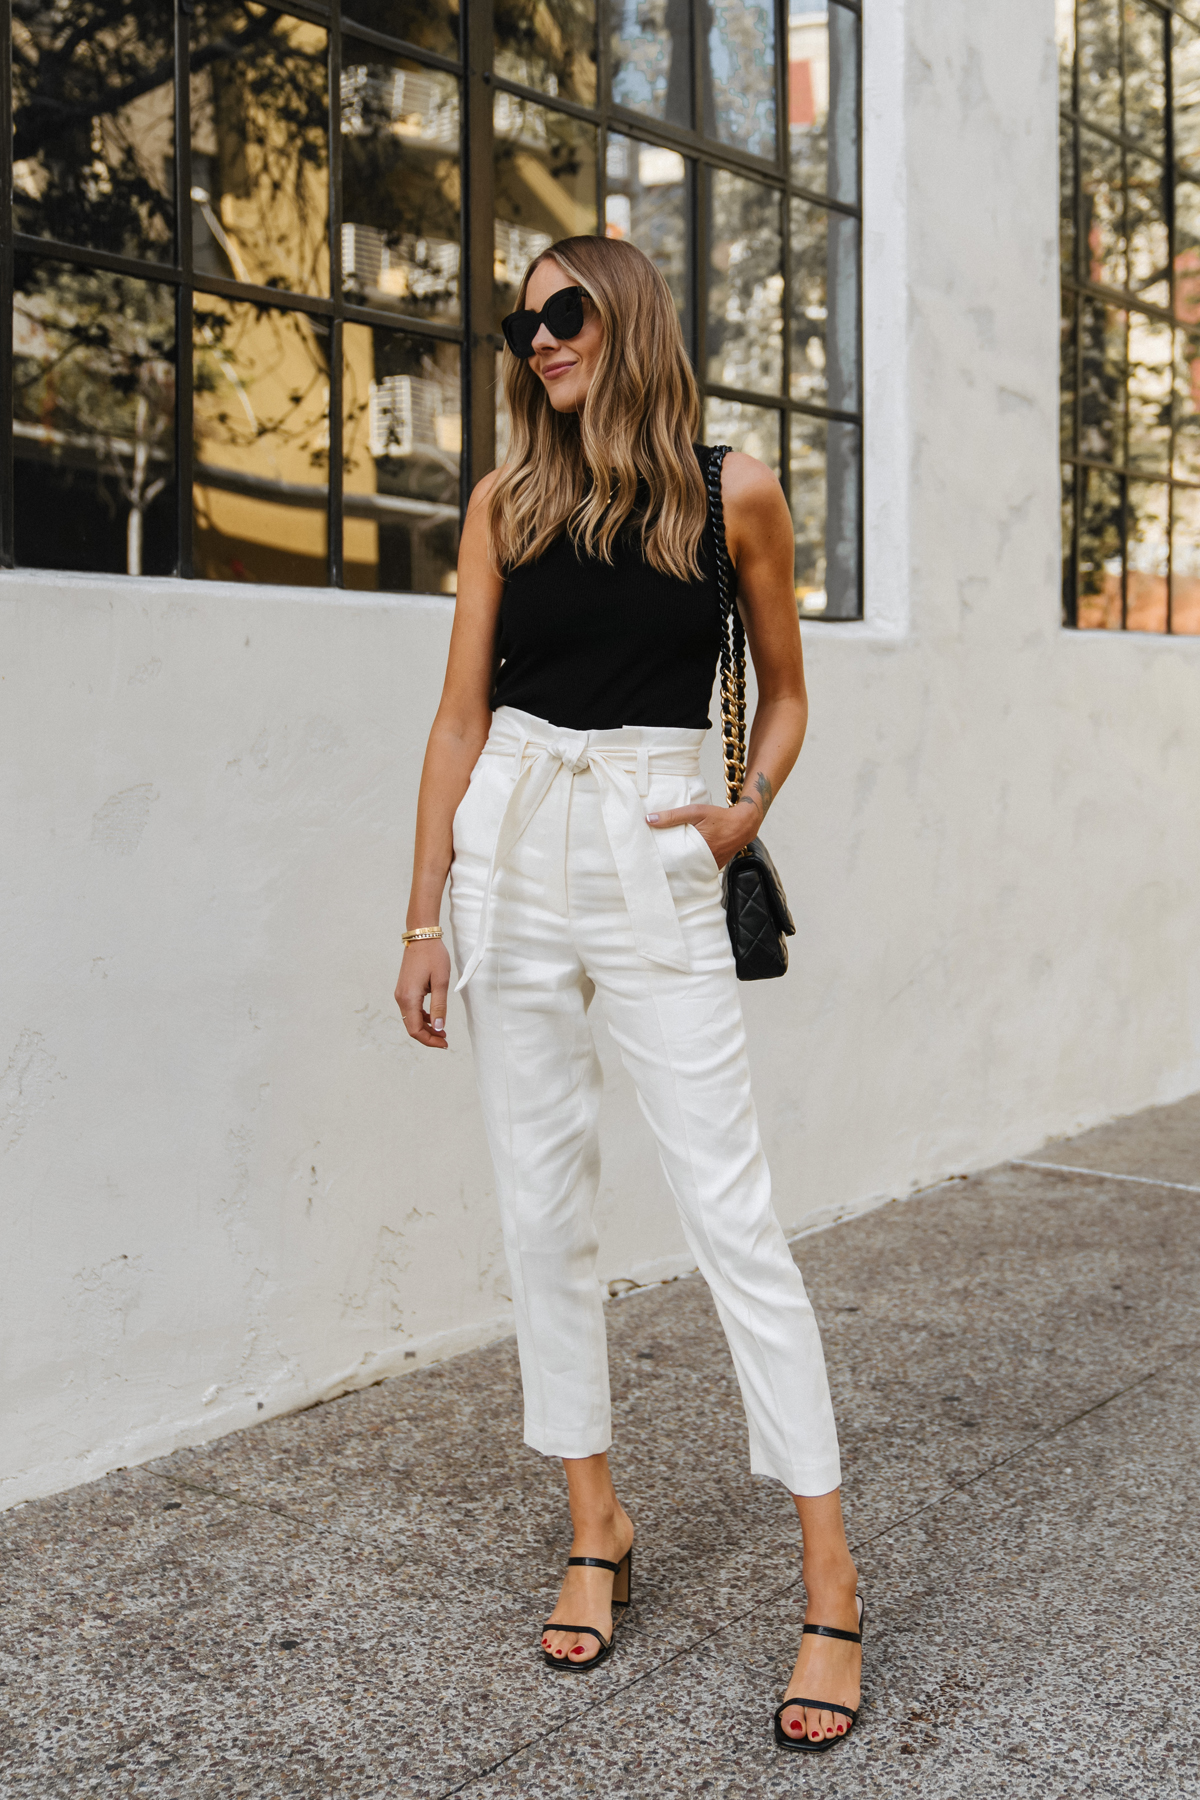 kighul Picket Bermad Add These White Pants to Your Closet for Spring - Fashion Jackson